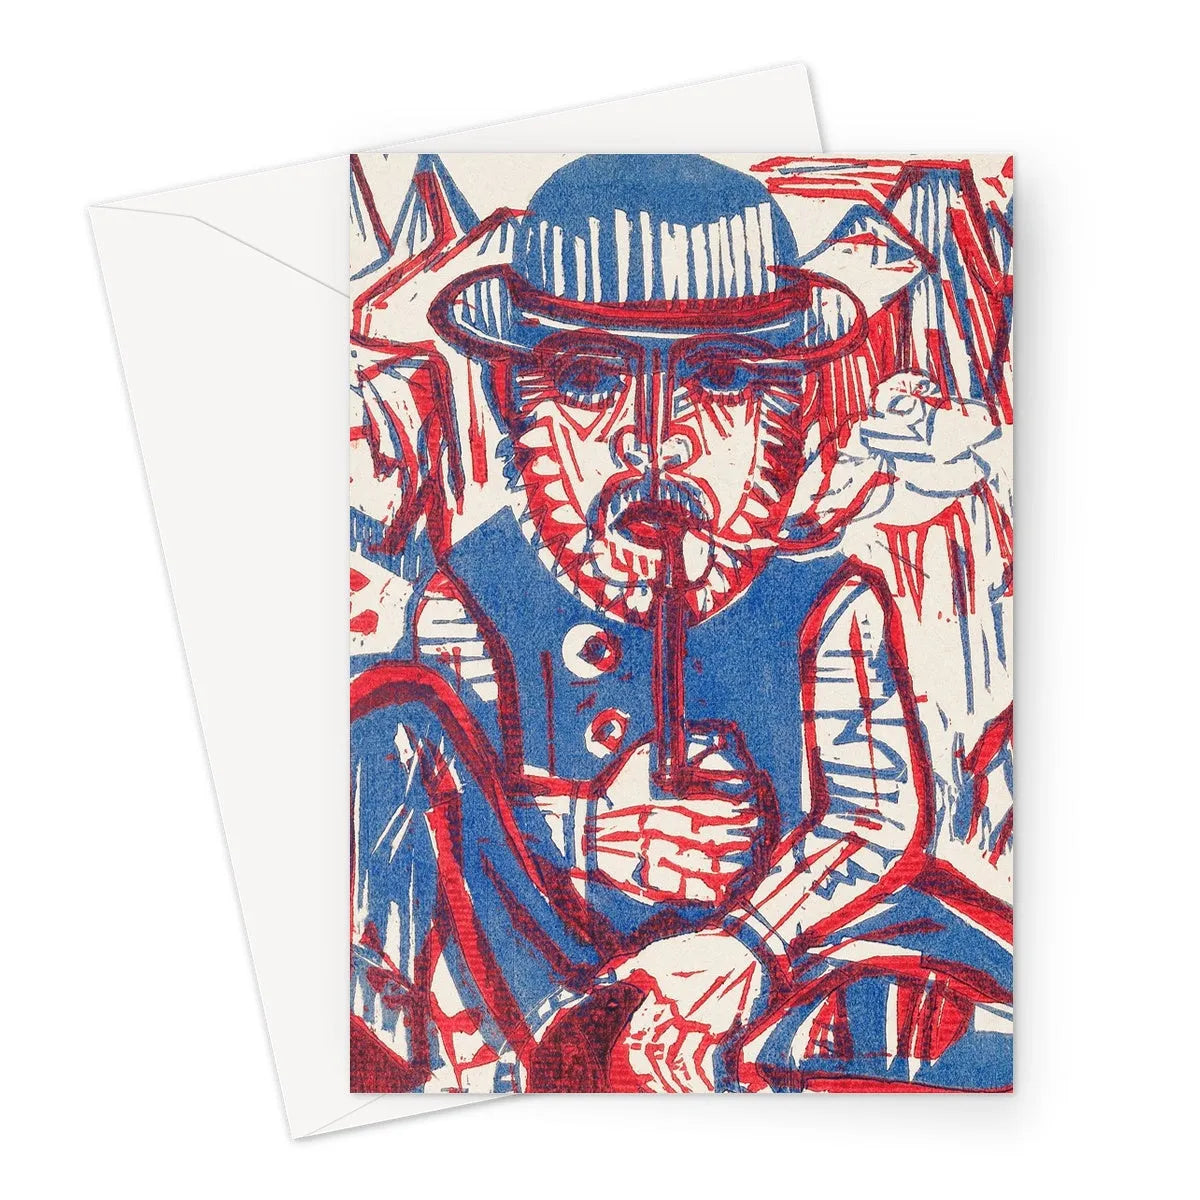 Smoking Peasant By Ernst Ludwig Kirchner Greeting Card - A5 Portrait / 1 Card - Greeting & Note Cards - Aesthetic Art